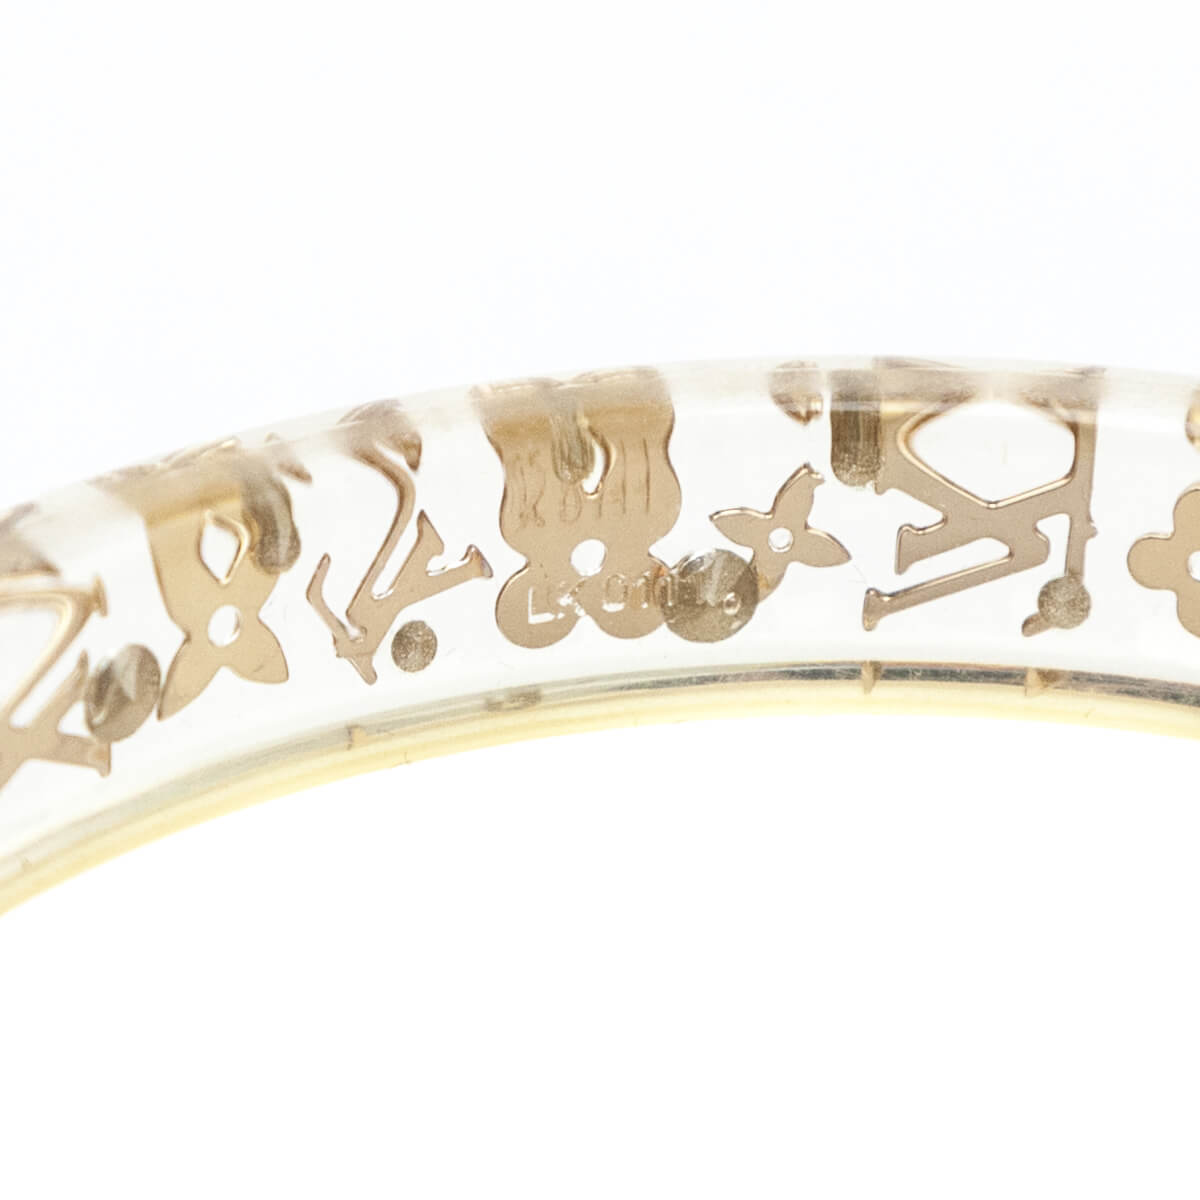 Louis Vuitton Clear and Gold Inclusion Thin Resin Bangle Bracelet